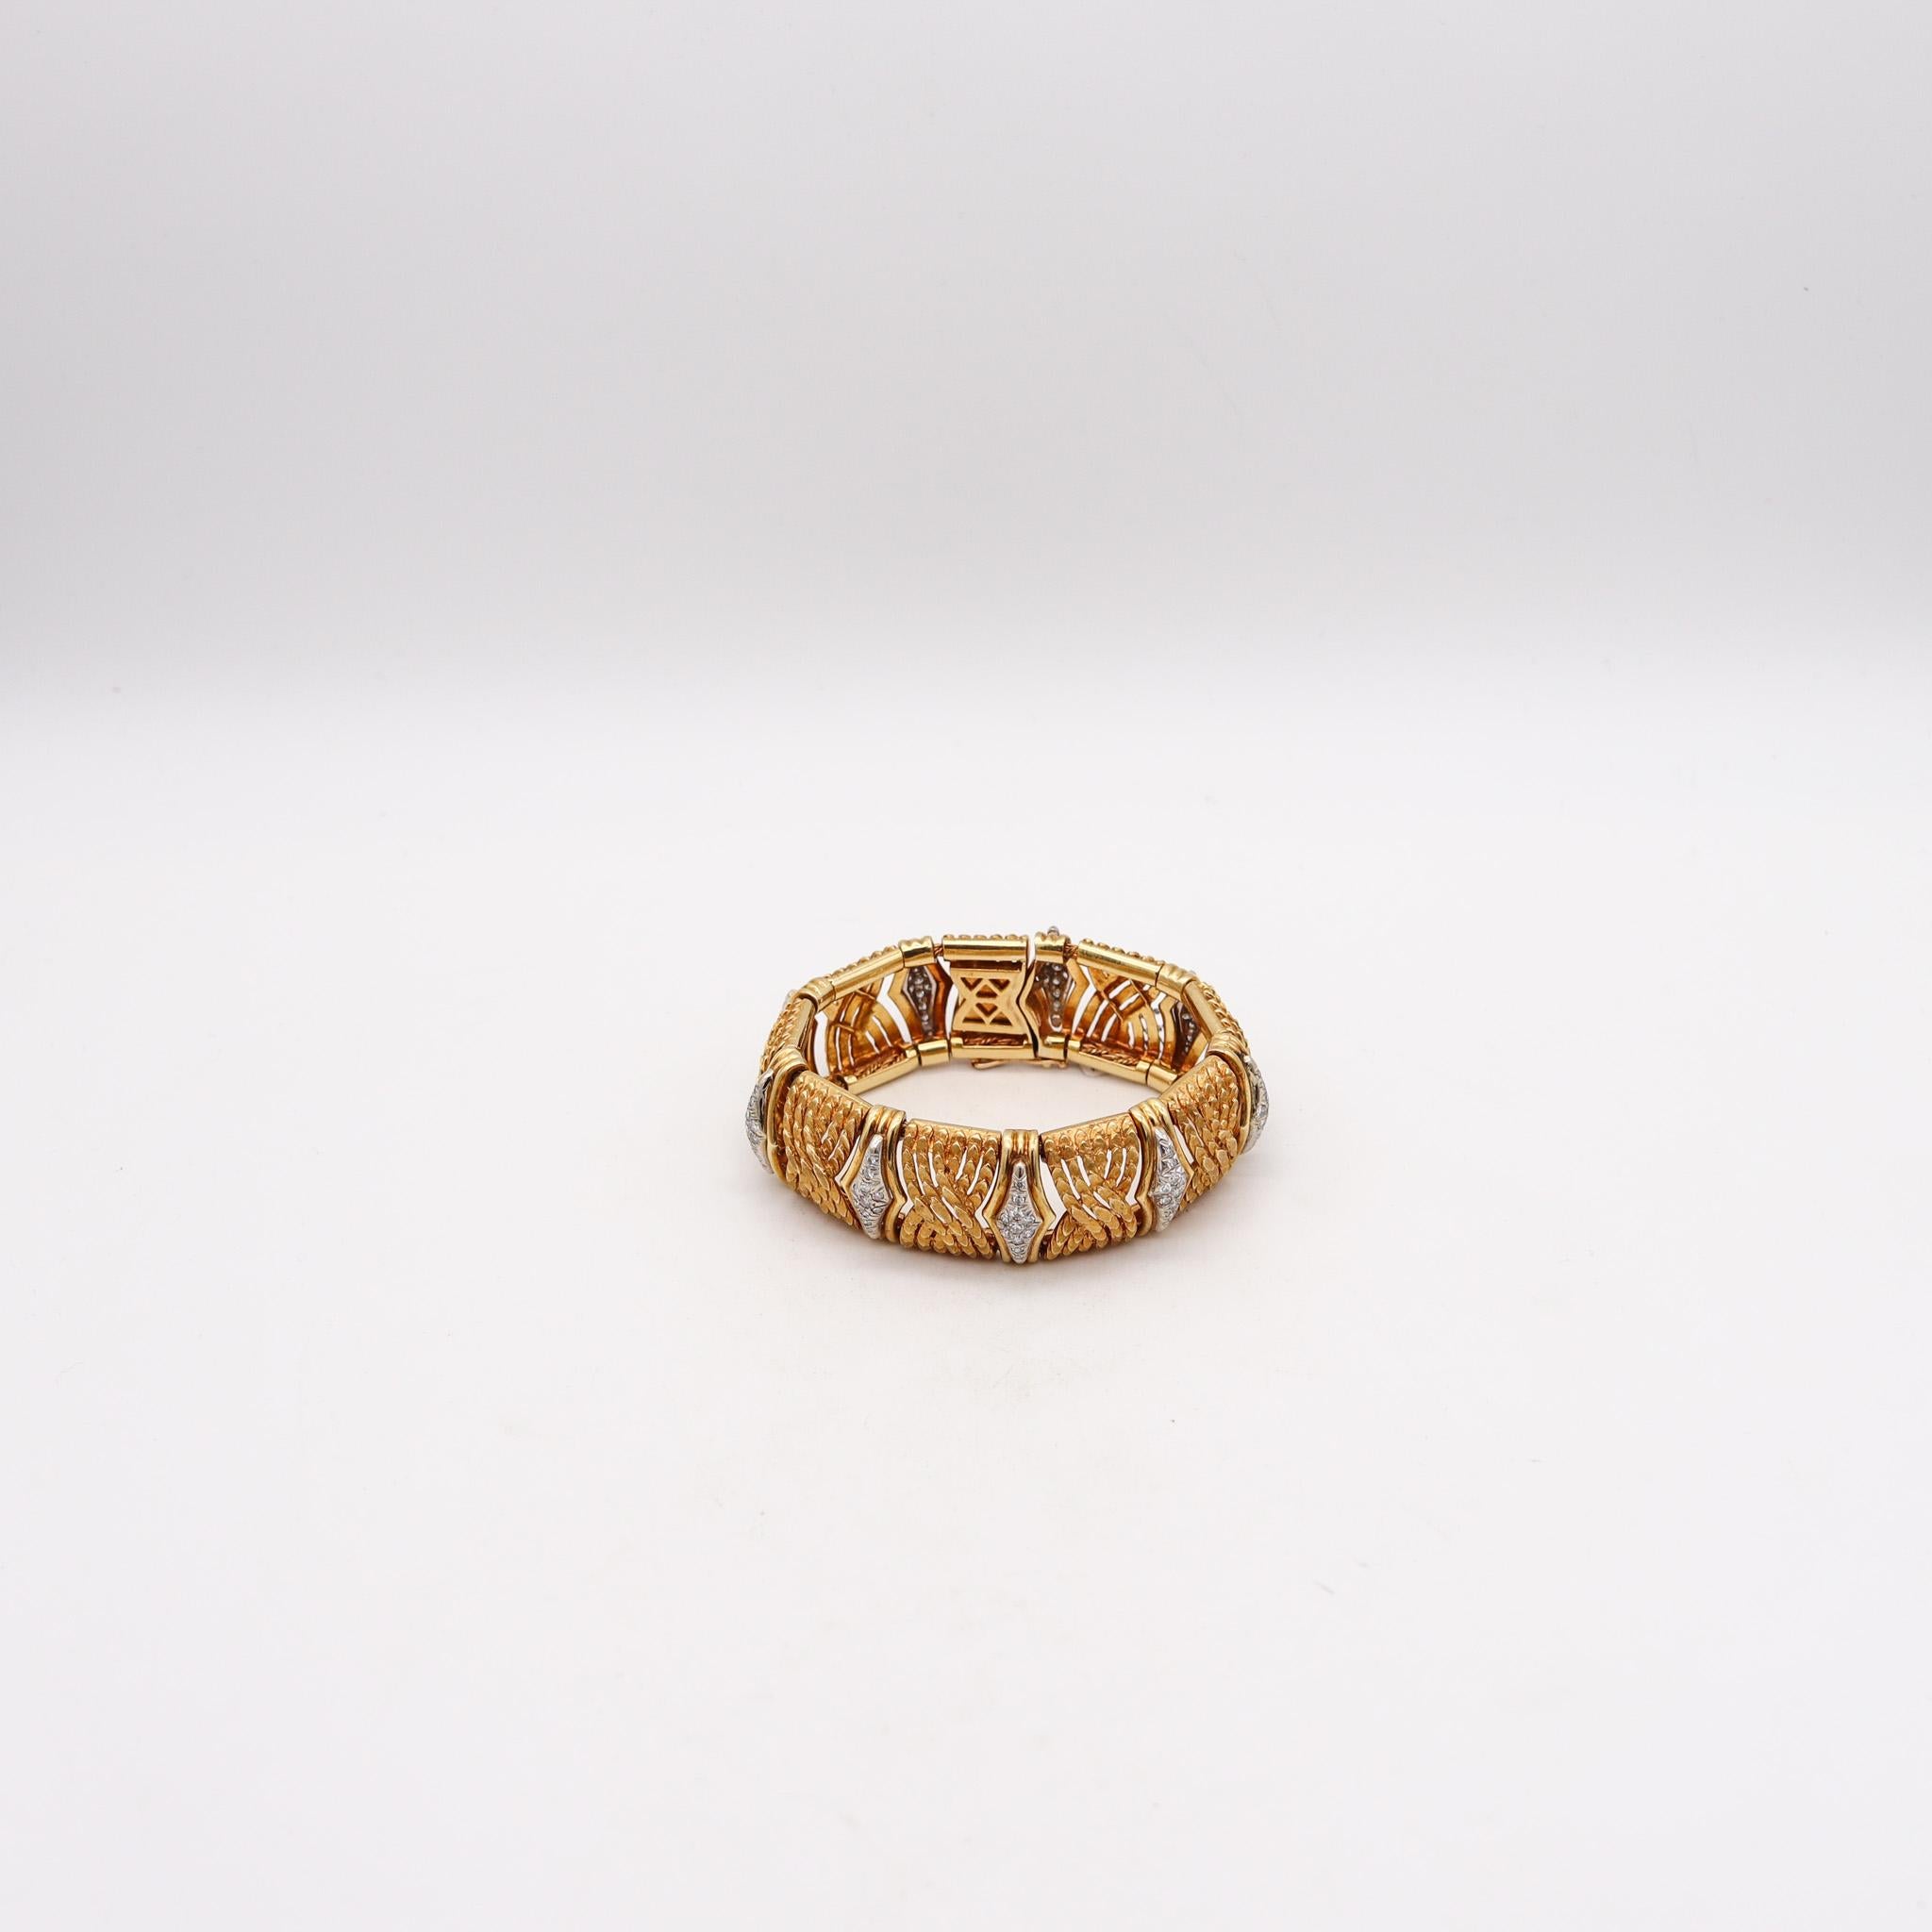 Italian mid century bracelet with diamonds.

Great bold, massive and textured bracelet with fabulous eye appeal, created in Italy during the mid century period, circa 1970. Composed by multiples rectangular links made un in solid yellow gold of 18